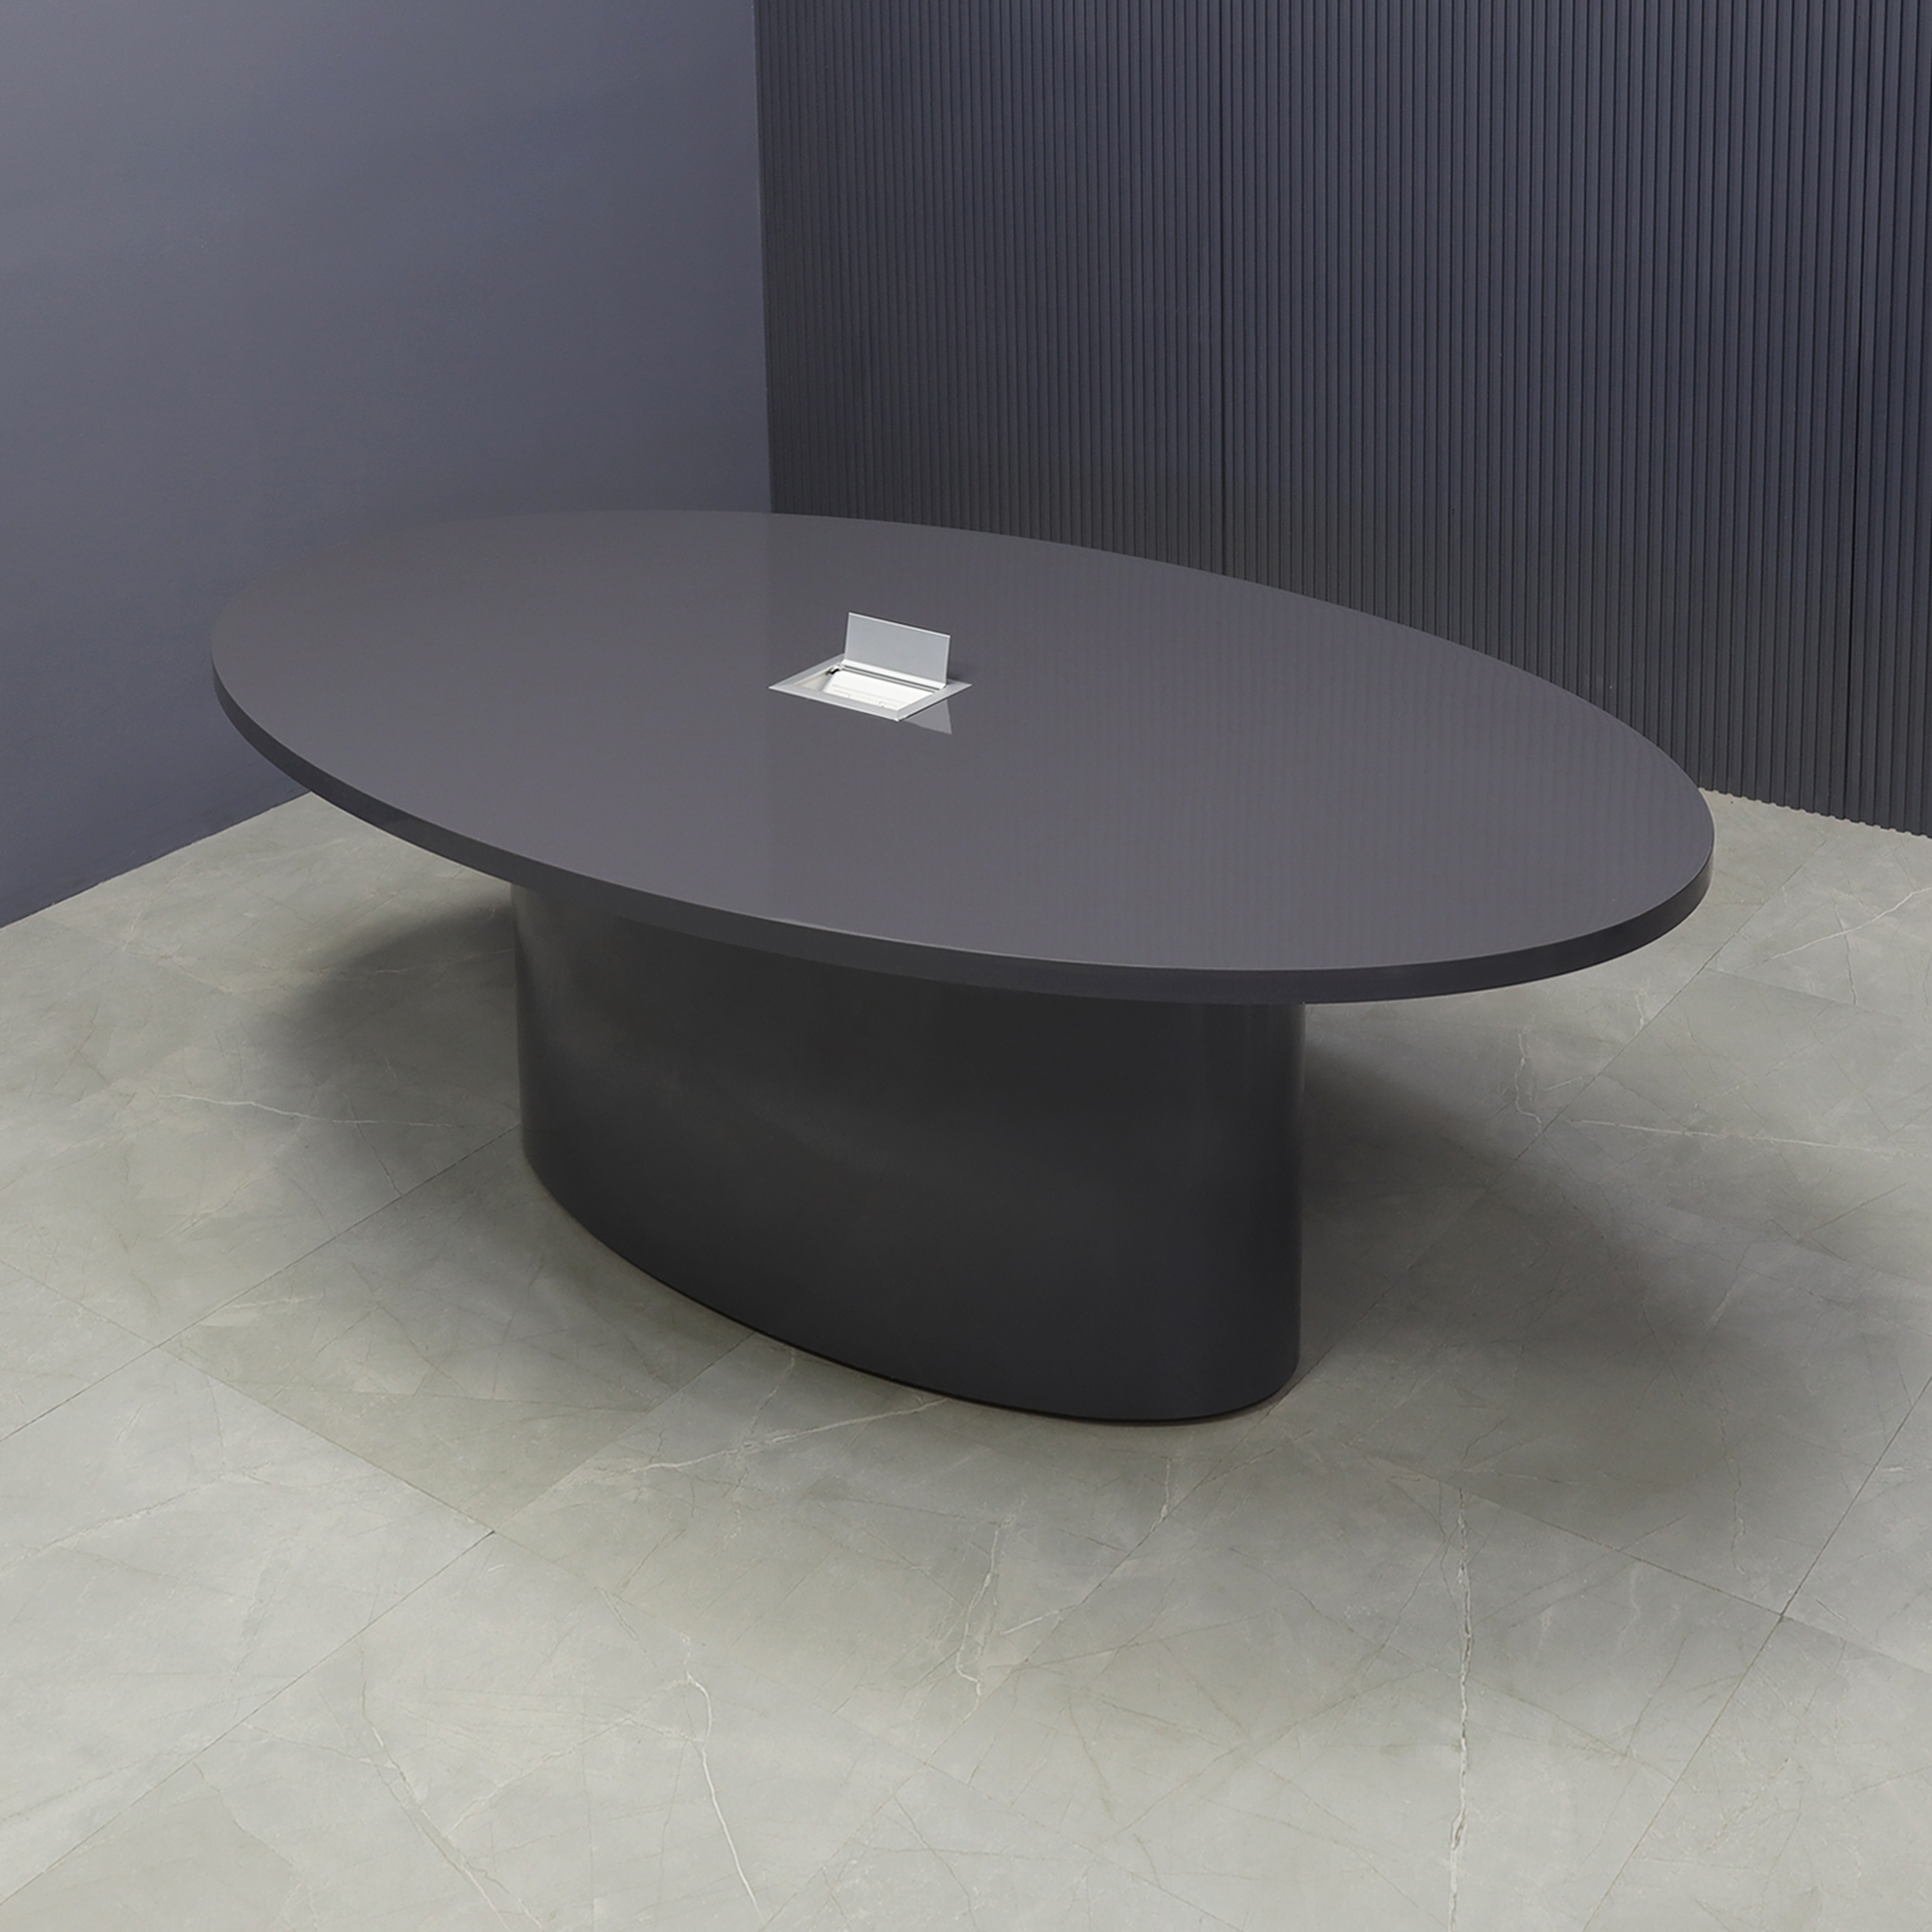 84-inch Newton Oval Conference Table With Laminate Top in storm gray gloss laminate top and base, with silver MX3 powerbox, shown here.